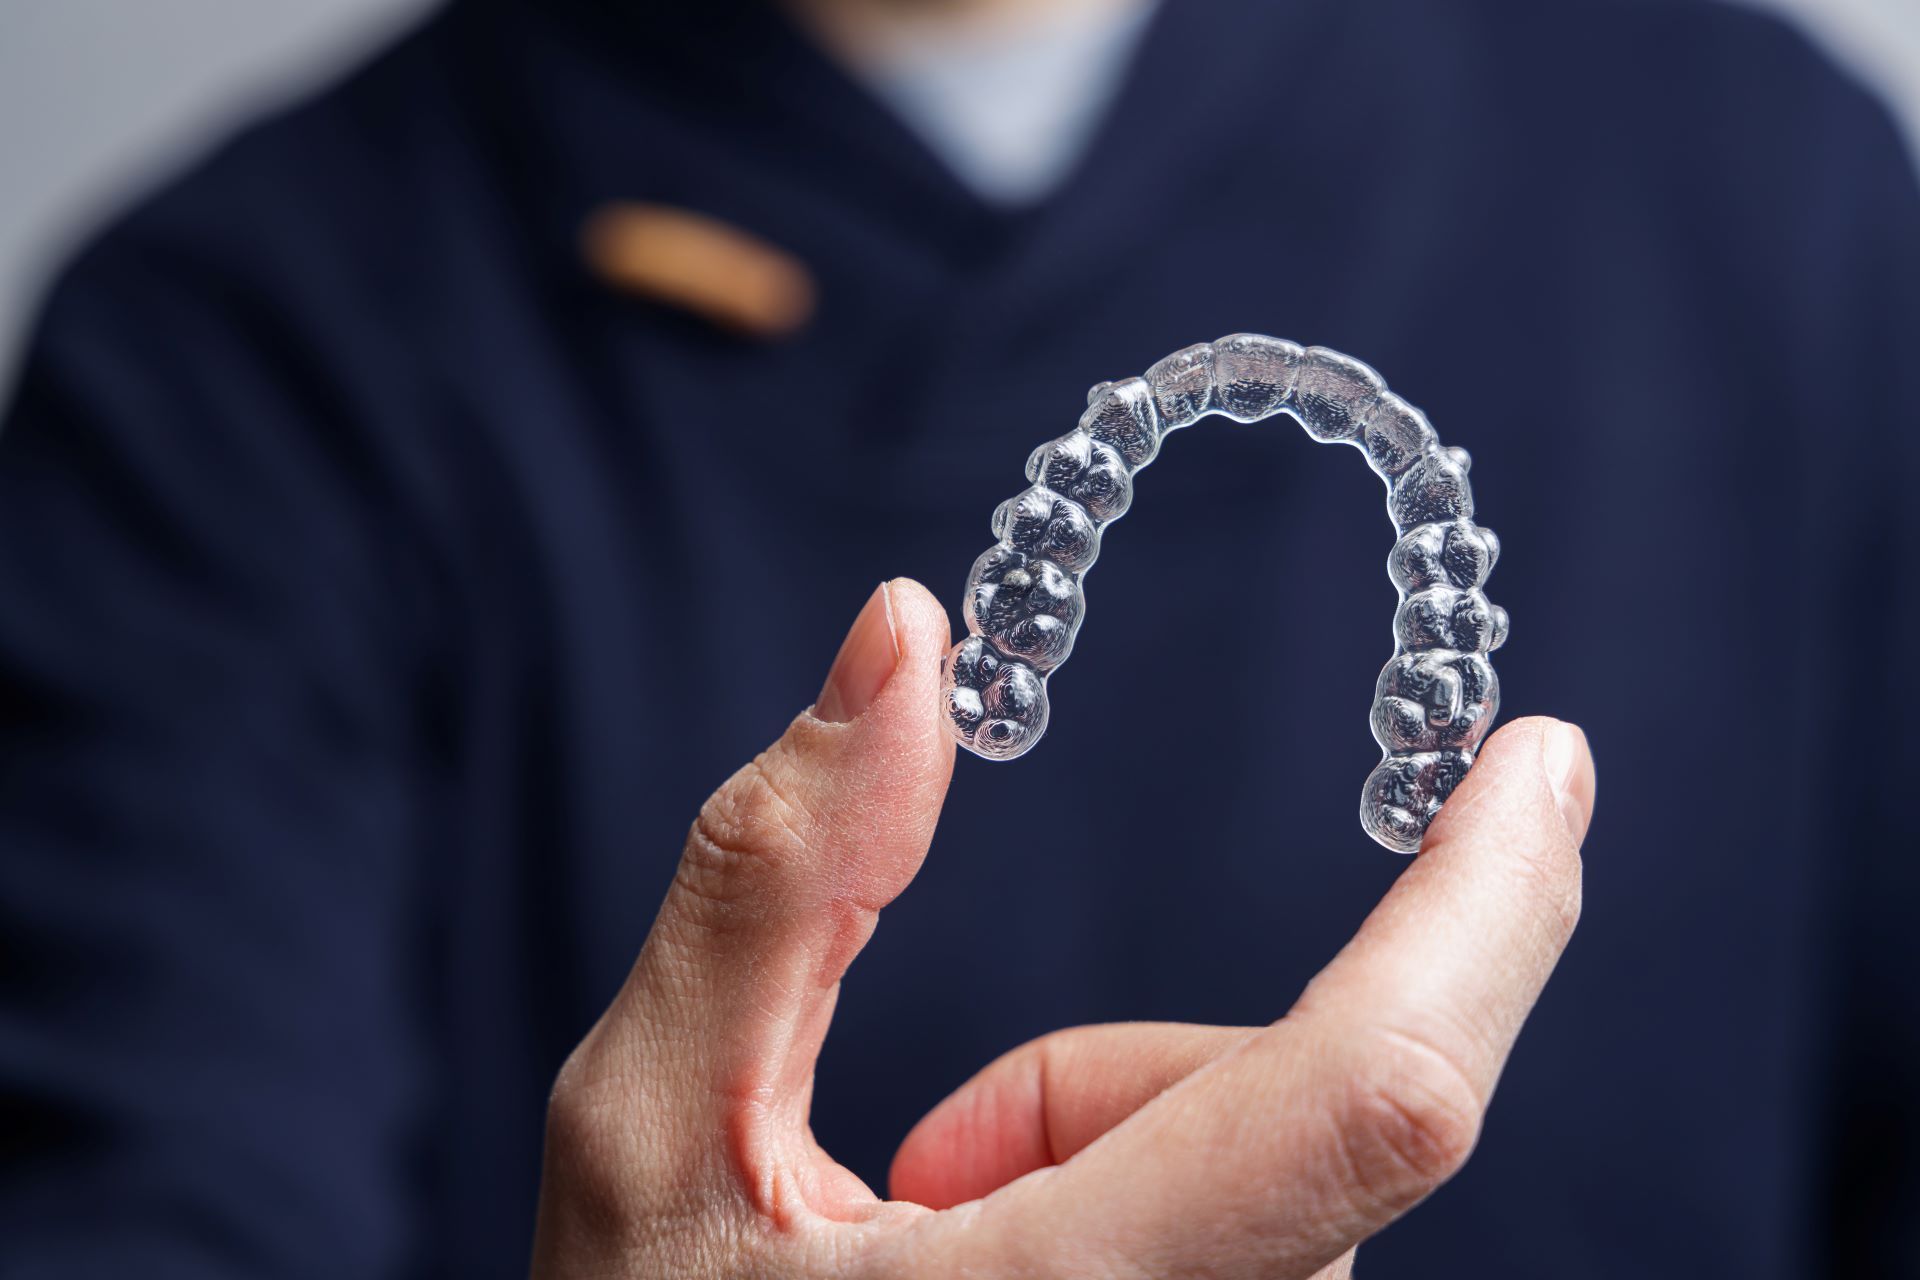 close up of man holding an Invisalign with two fingers. Navy shirt blurred in background.